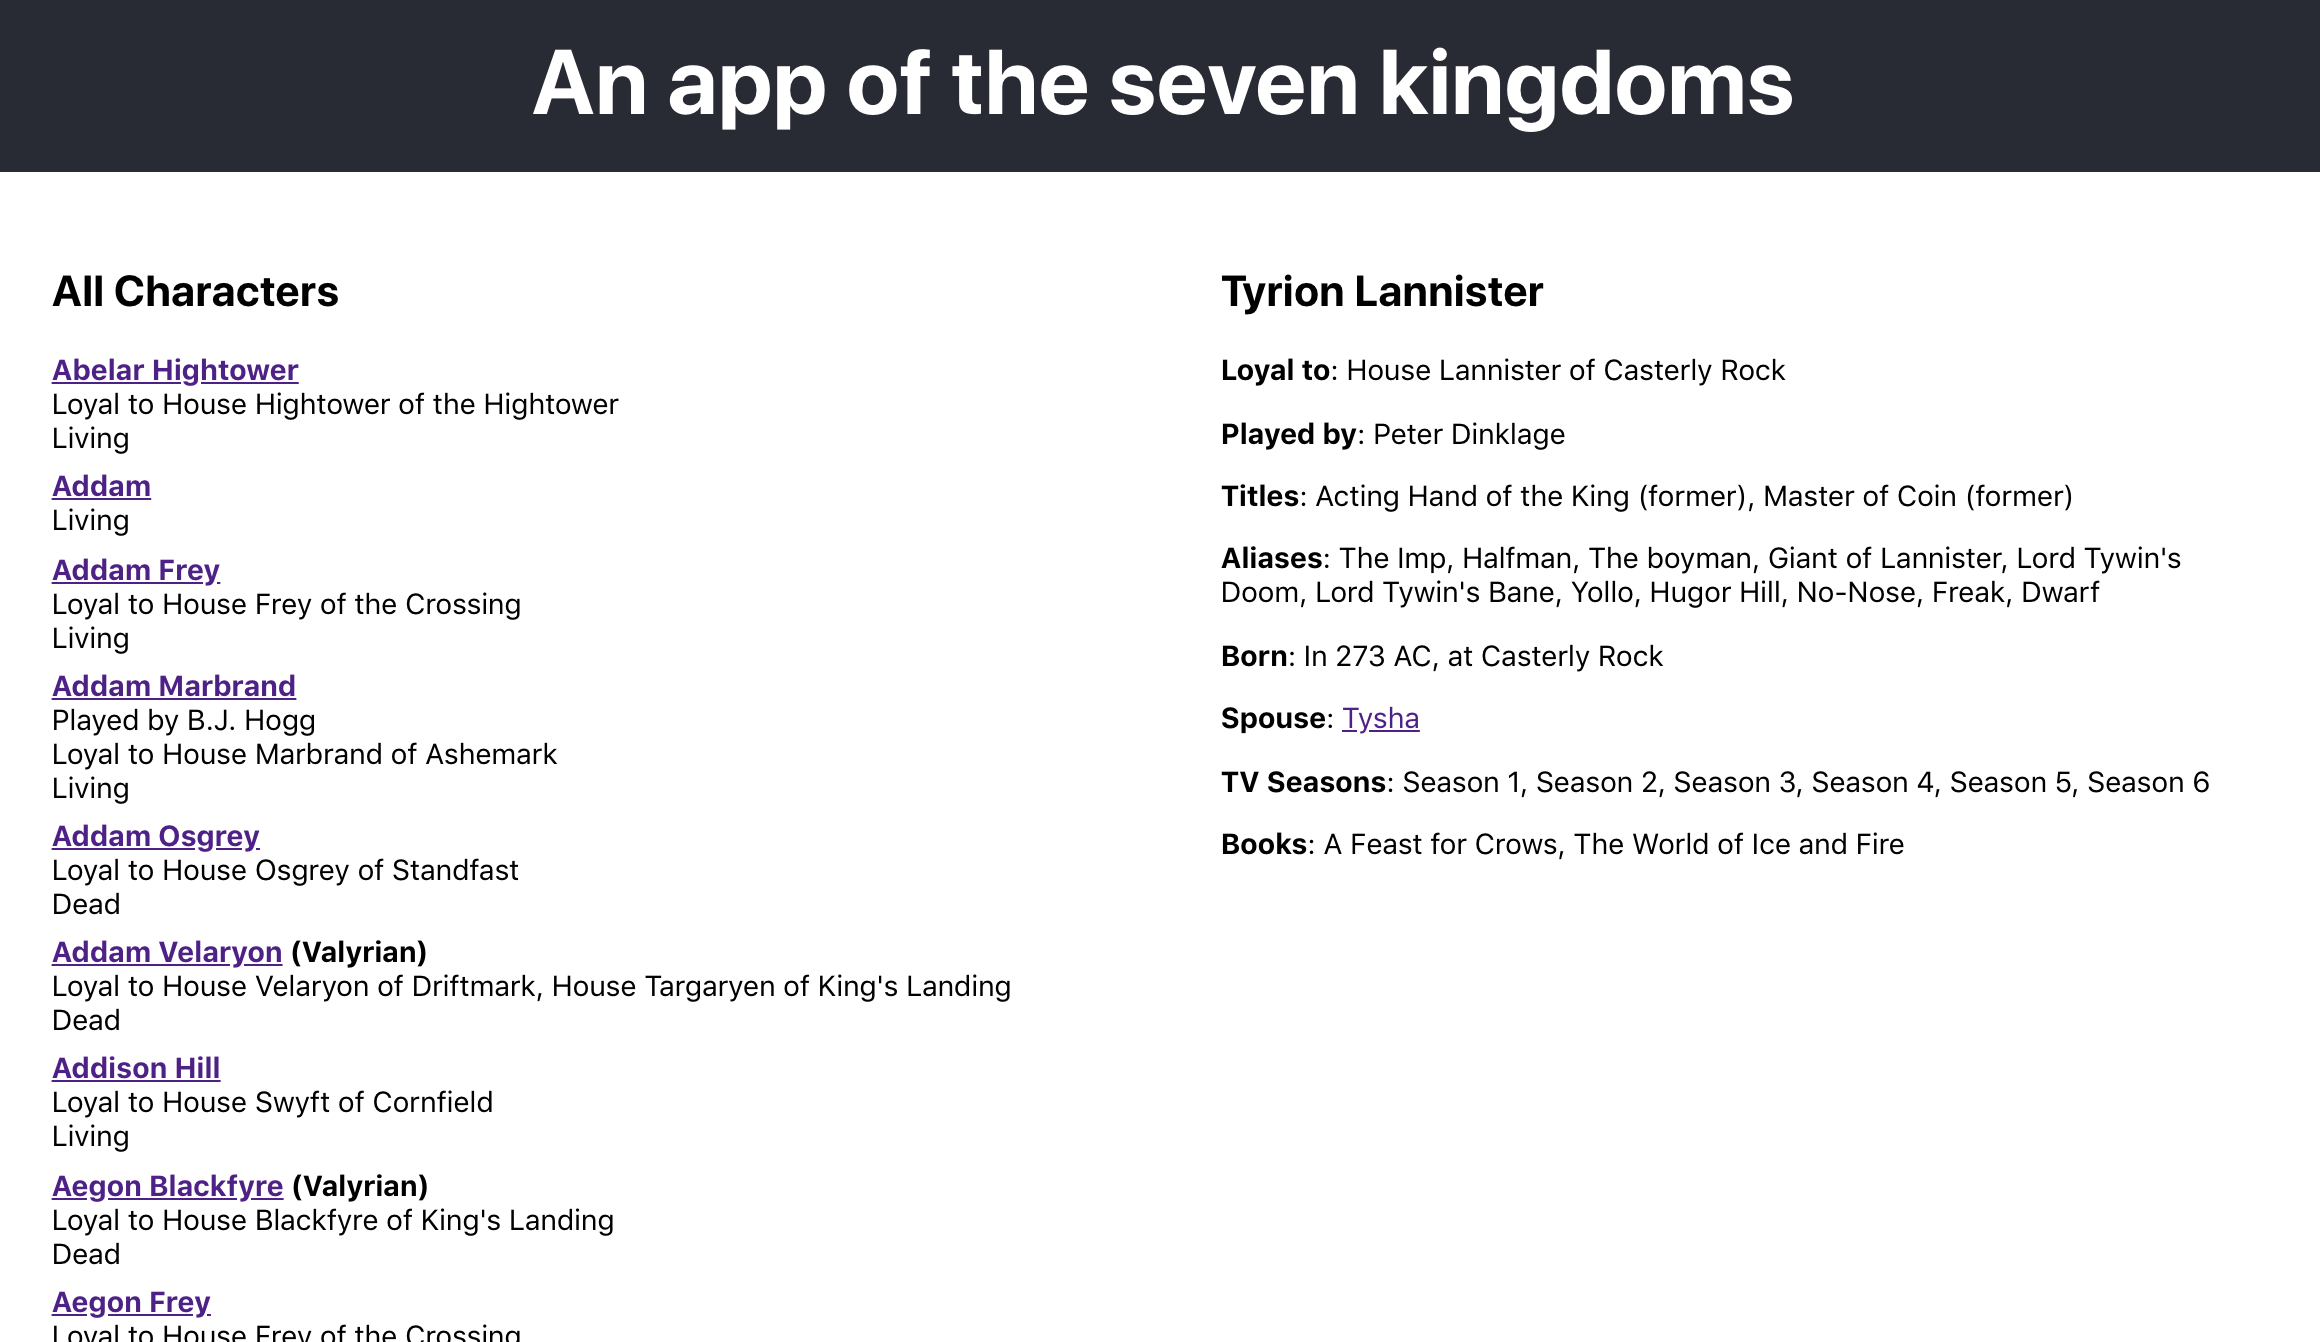 An app of the Seven Kingdoms